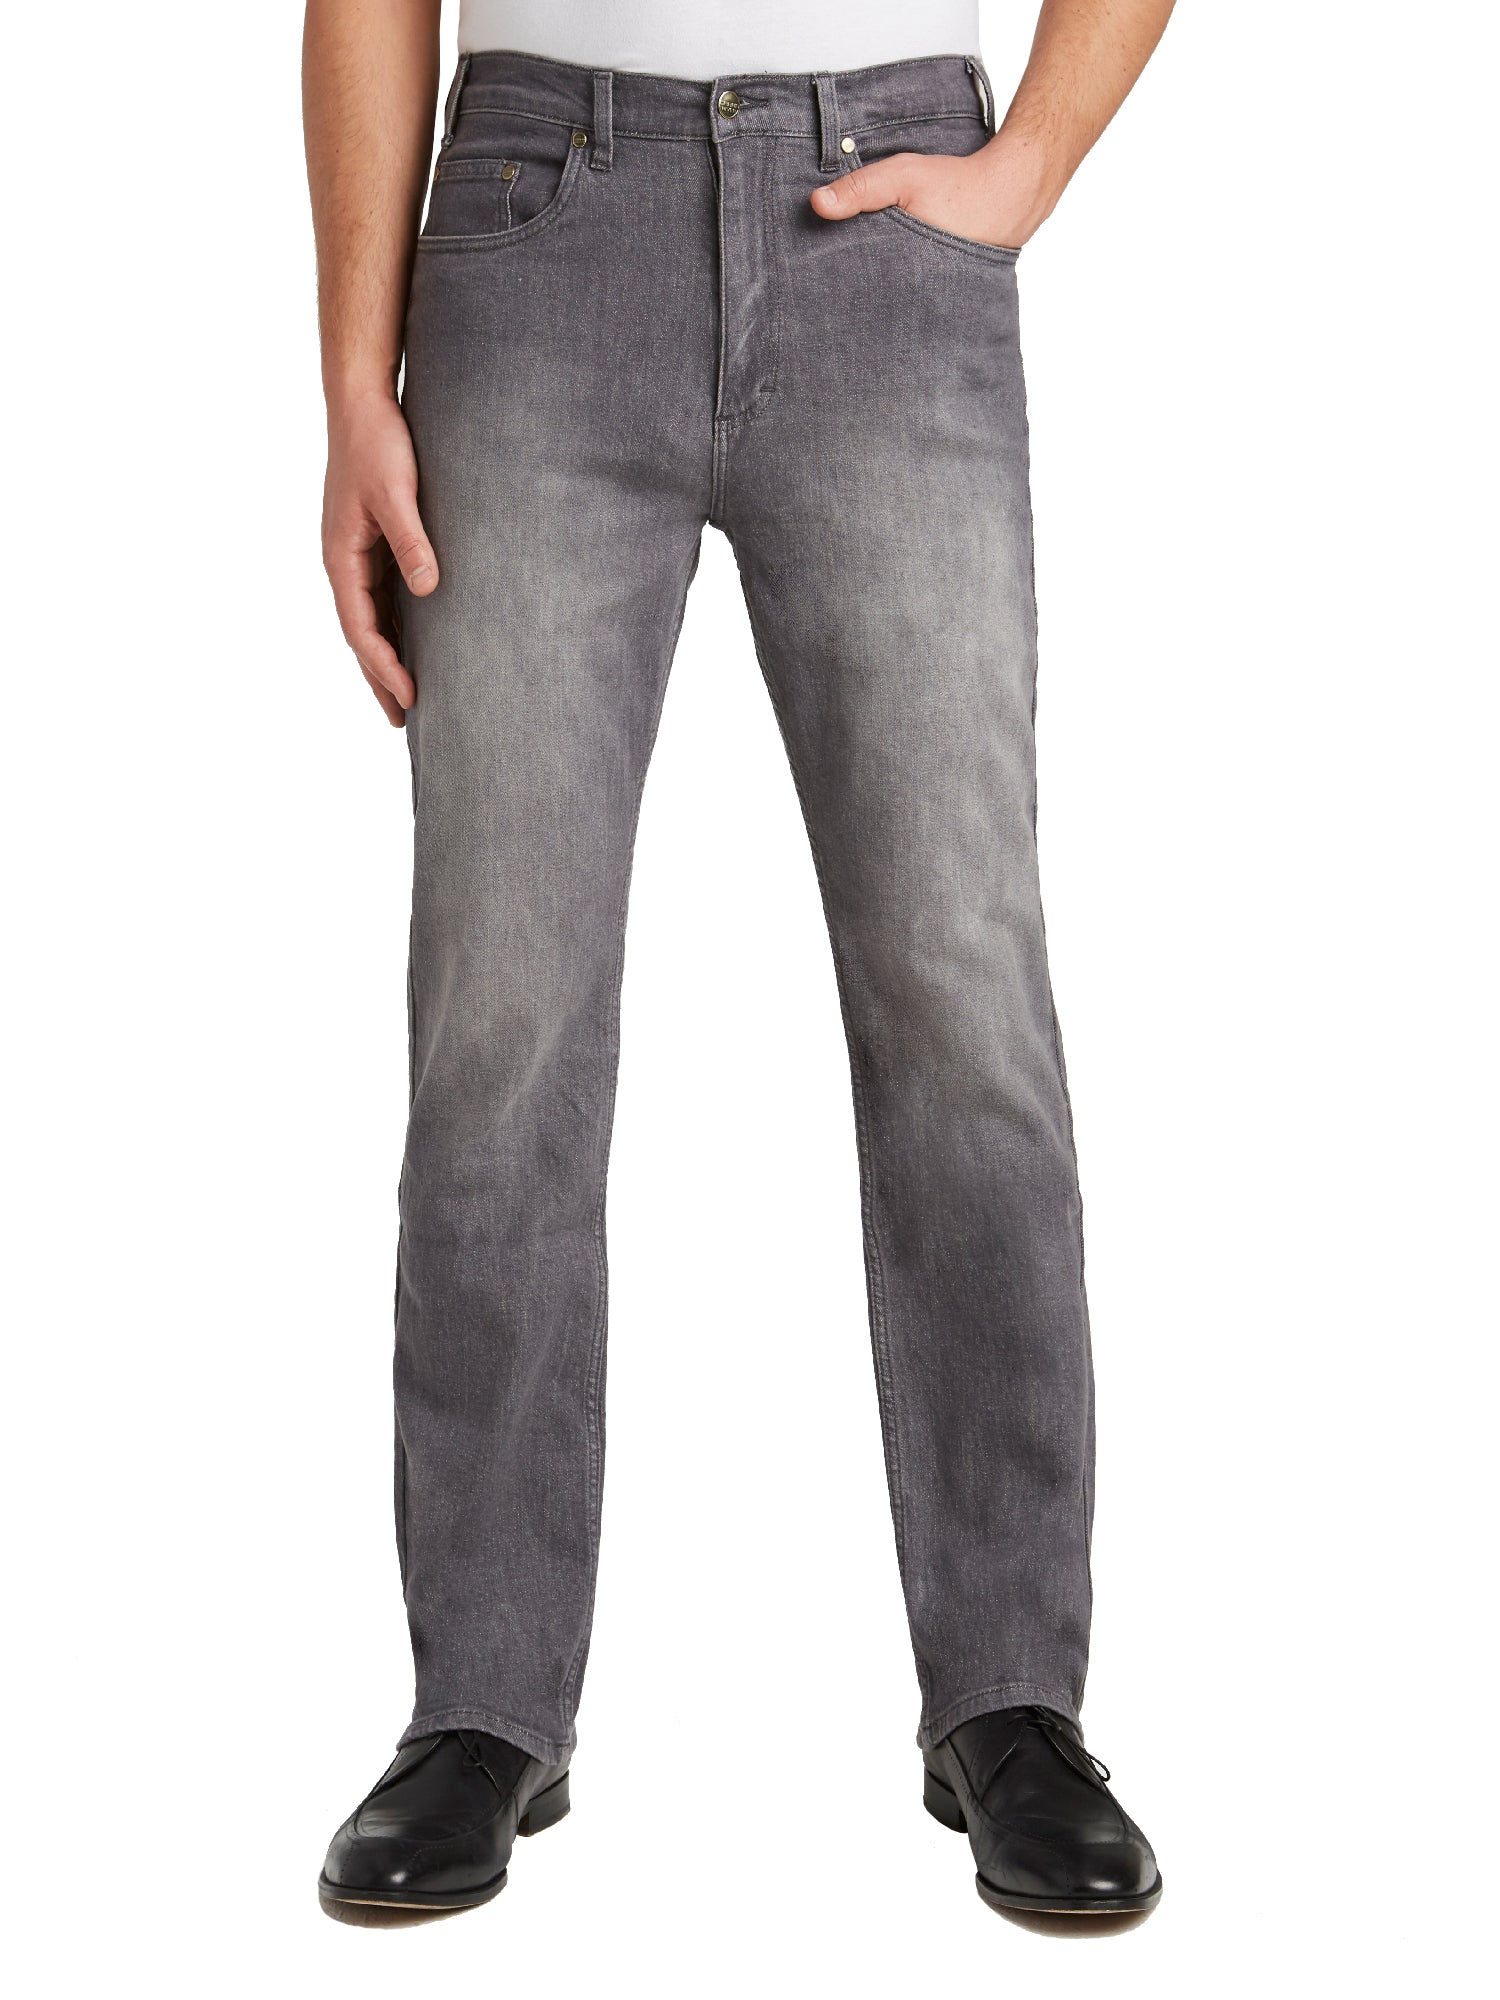 Grand River Marina Collection Stretch Jeans in Grey - Big Man Sizes